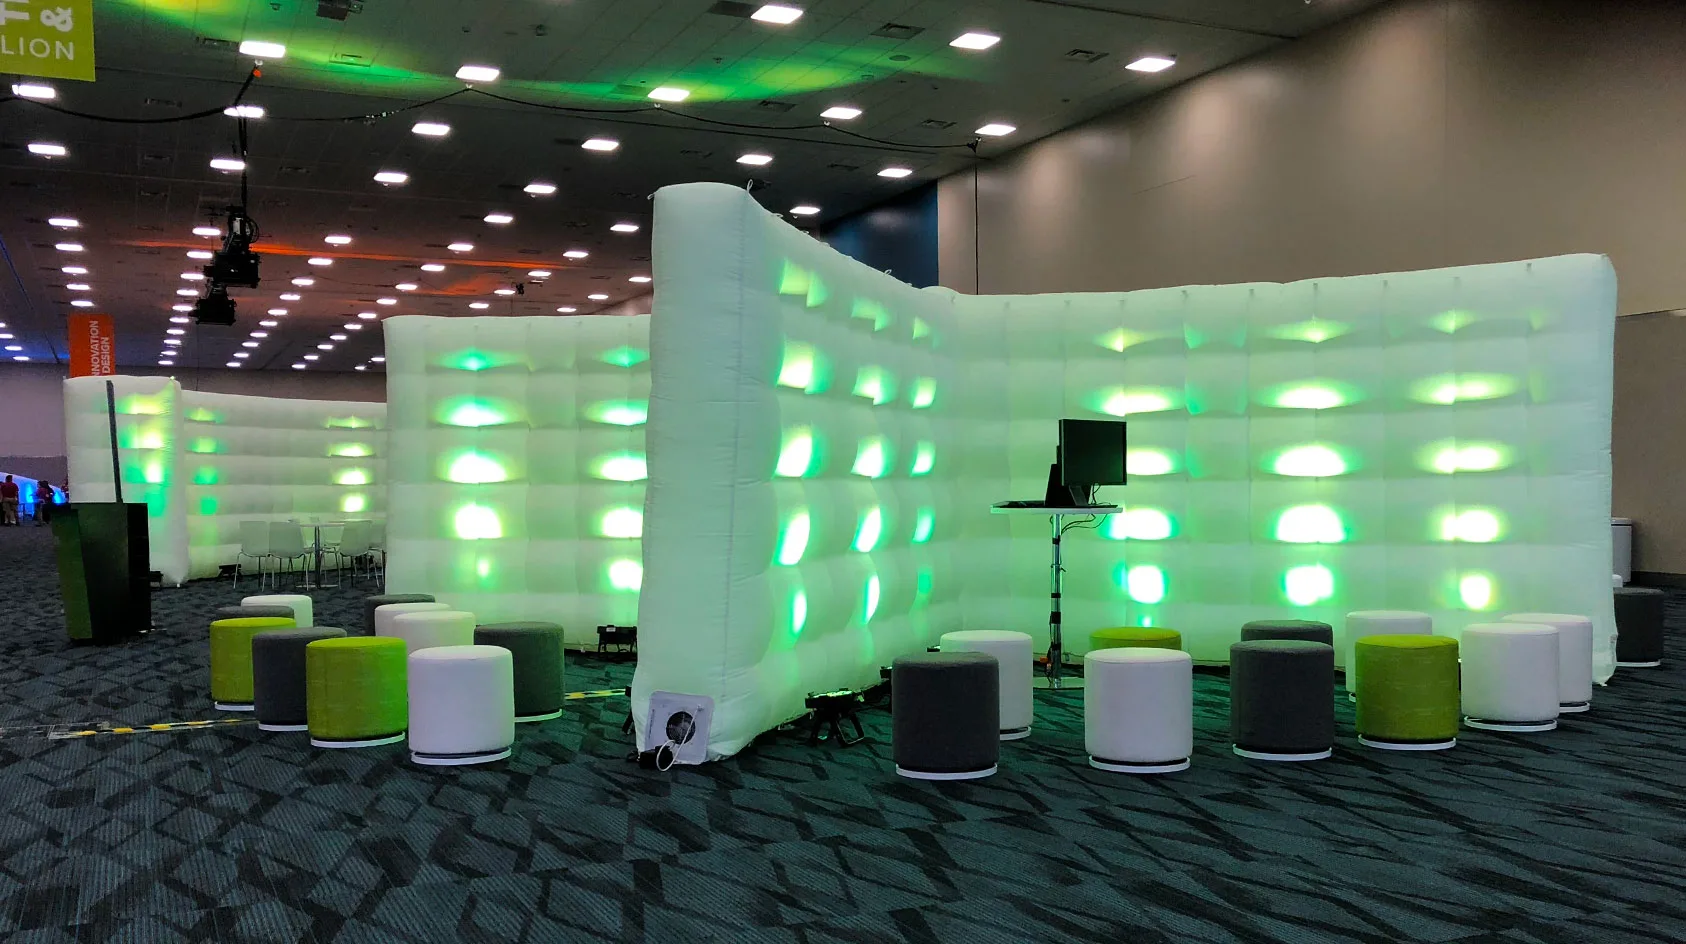 Pic showing a Created By Air Cross wall with green spot lighting installed at an indoor event